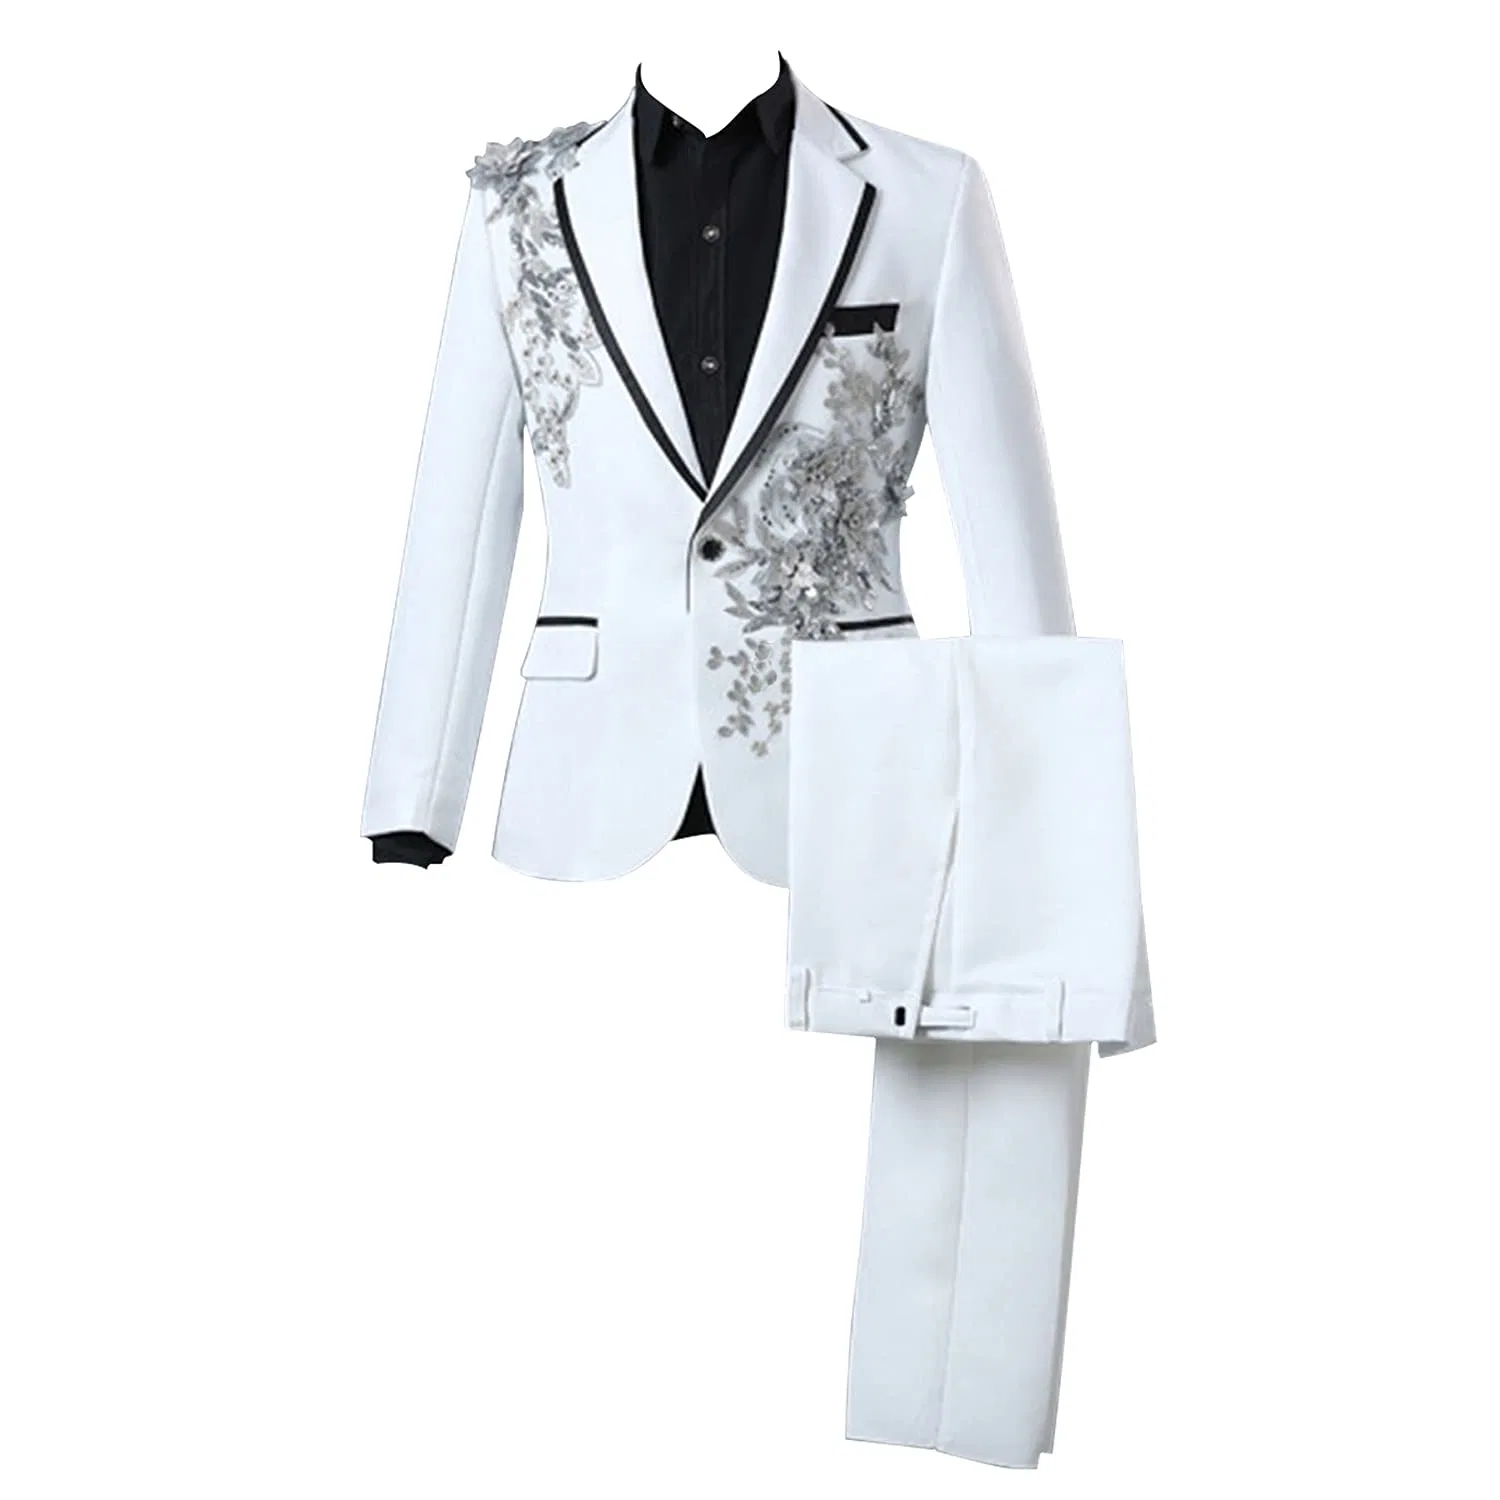 Prom Wedding Suit Set with Printed Dinner Jacket and Pants for Men